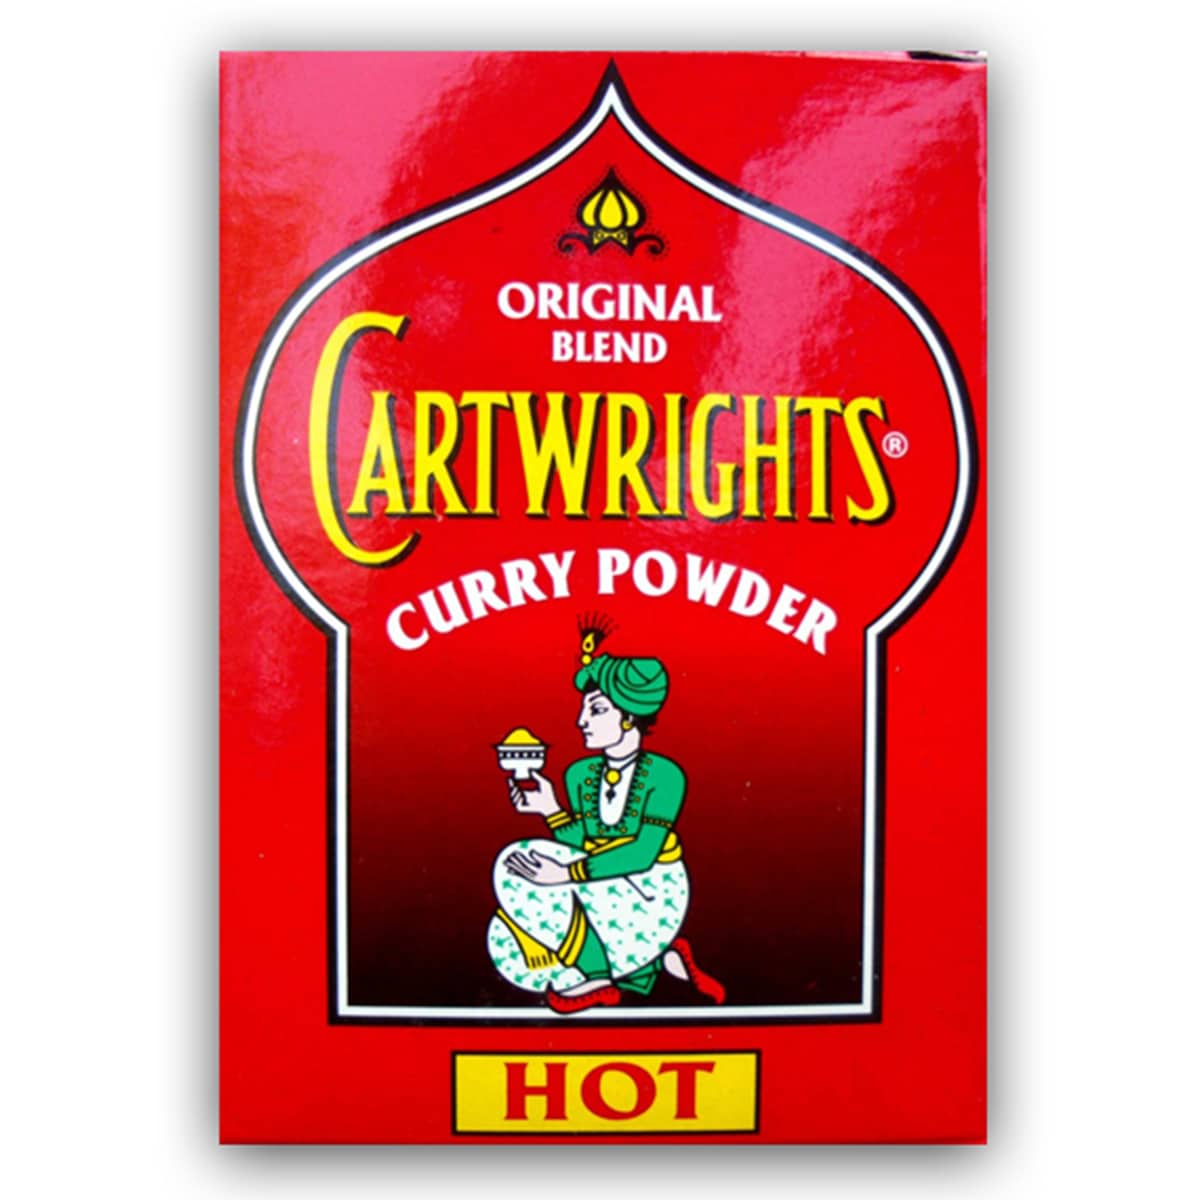 Buy Cartwrights Curry Powder Hot - 100 gm